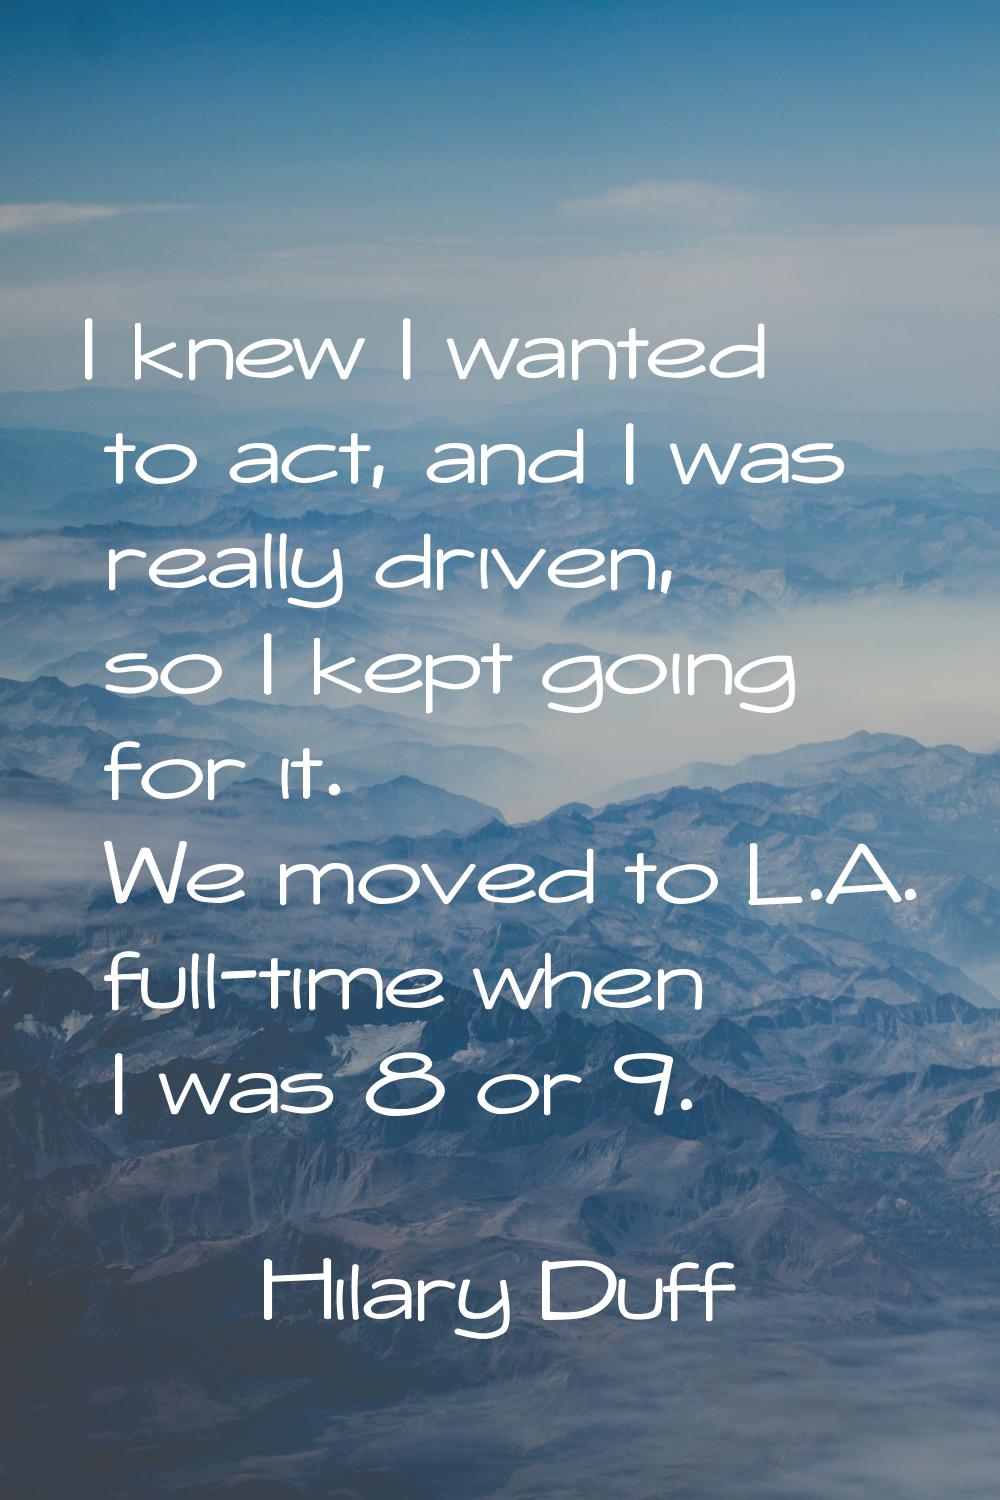 I knew I wanted to act, and I was really driven, so I kept going for it. We moved to L.A. full-time